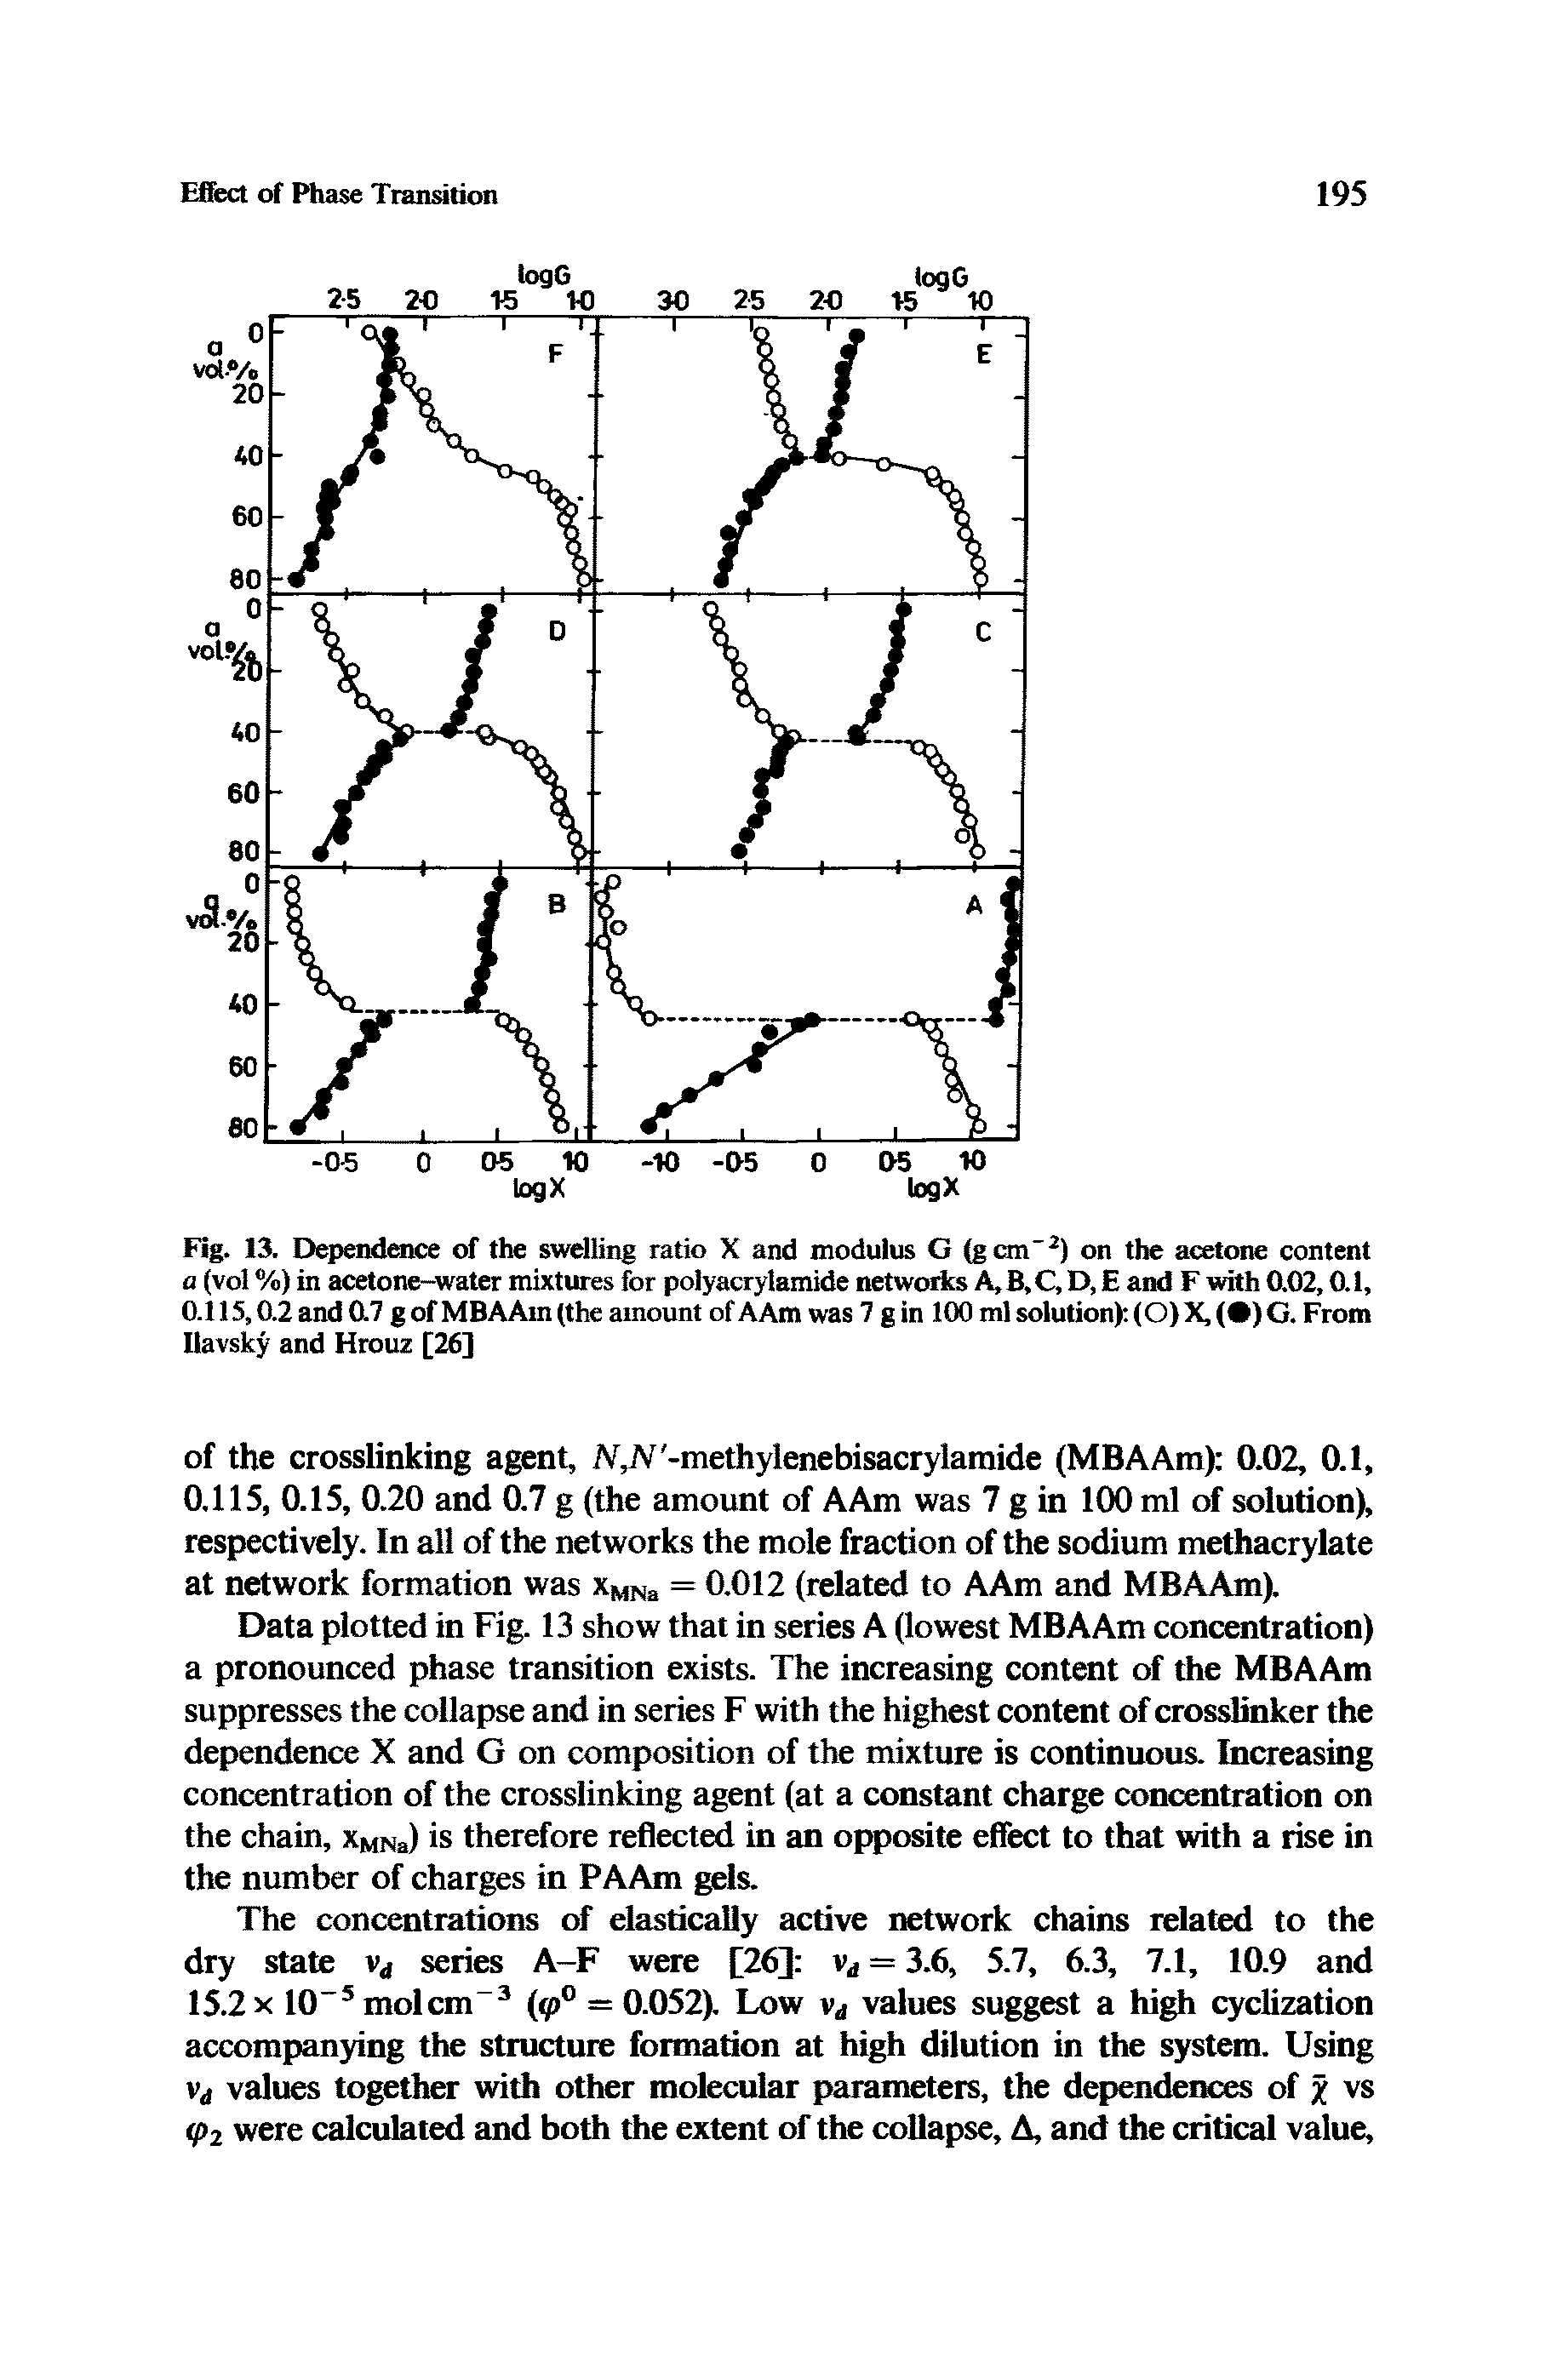 Fig. 13. Dependence of the swelling ratio X and modulus G (gem 2) on the acetone content a (vol %) in acetone-water mixtures for polyacrylamide networks A,B,C, D, E and F with 0.02,0.1, 0.115,0.2 and 0.7 gofMBAAm (the amount ofAAm was 7 gin 100 ml solution) (O) X, ( ) G. From Ilavsky and Hrouz [26]...